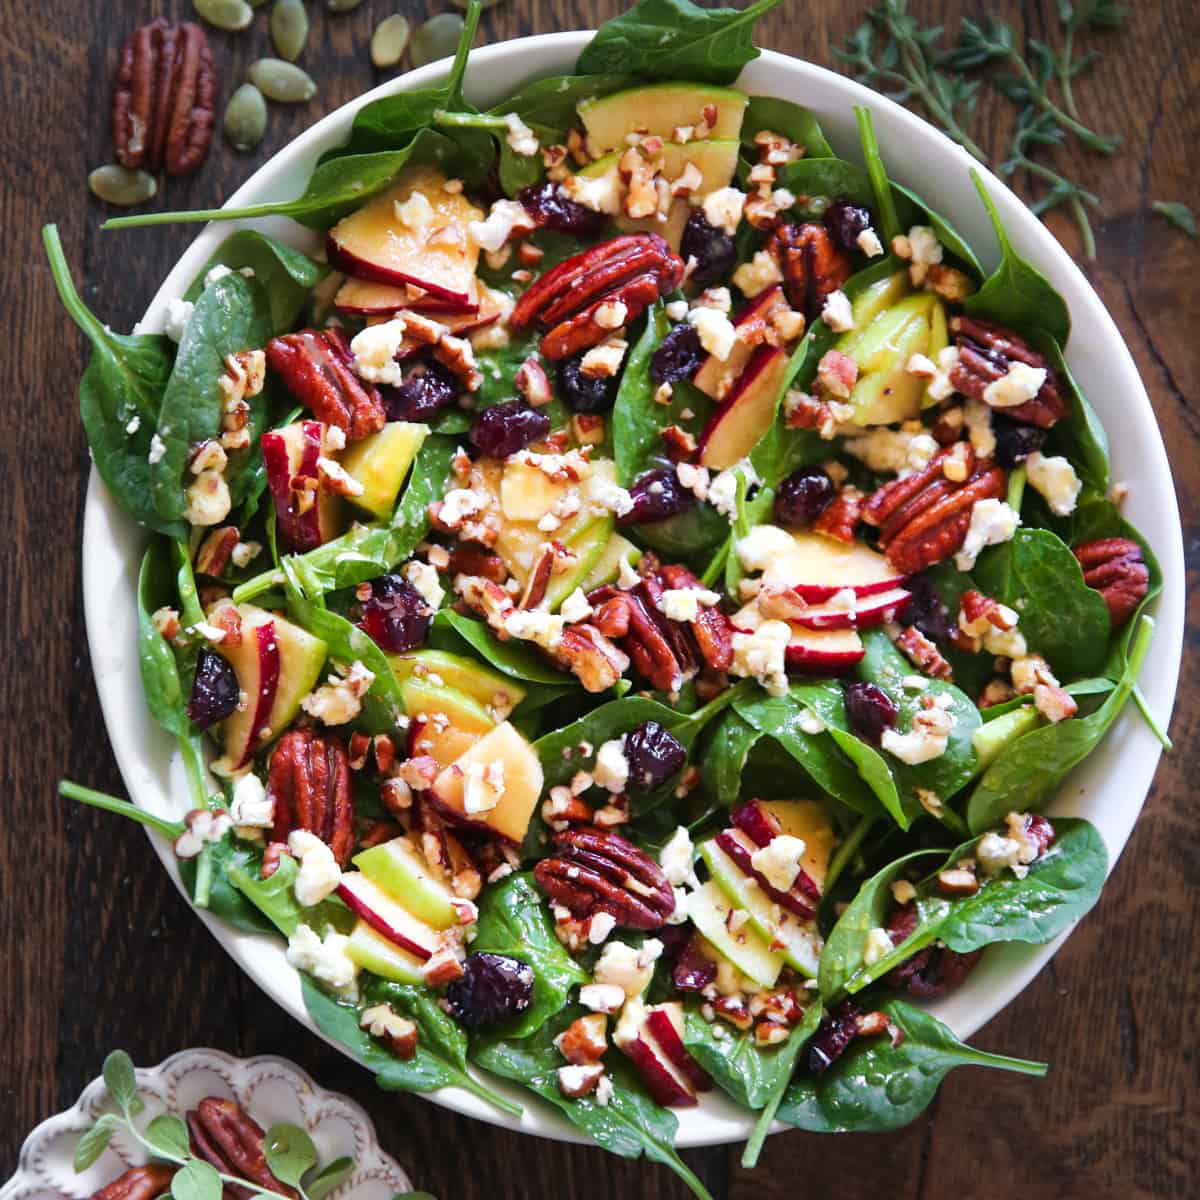 Apple Spinach Salad with Cranberries, Pecans, and Goat Cheese in a white bowl.